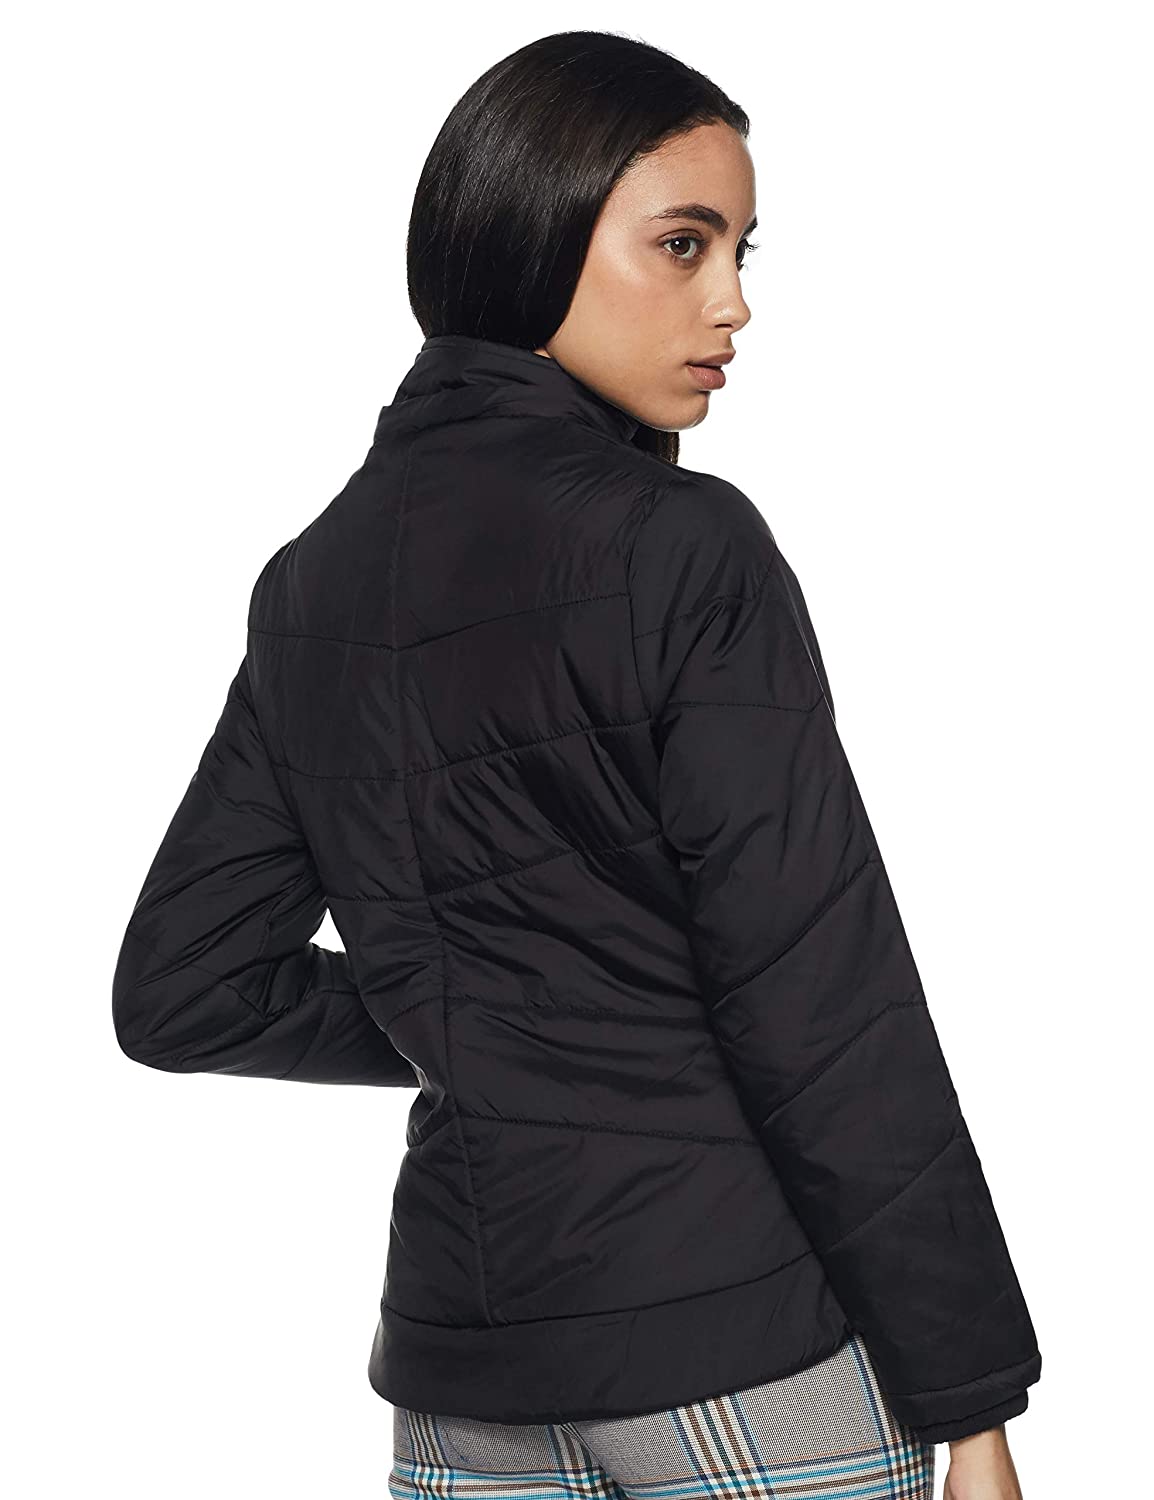 Women's Jacket Normal Product